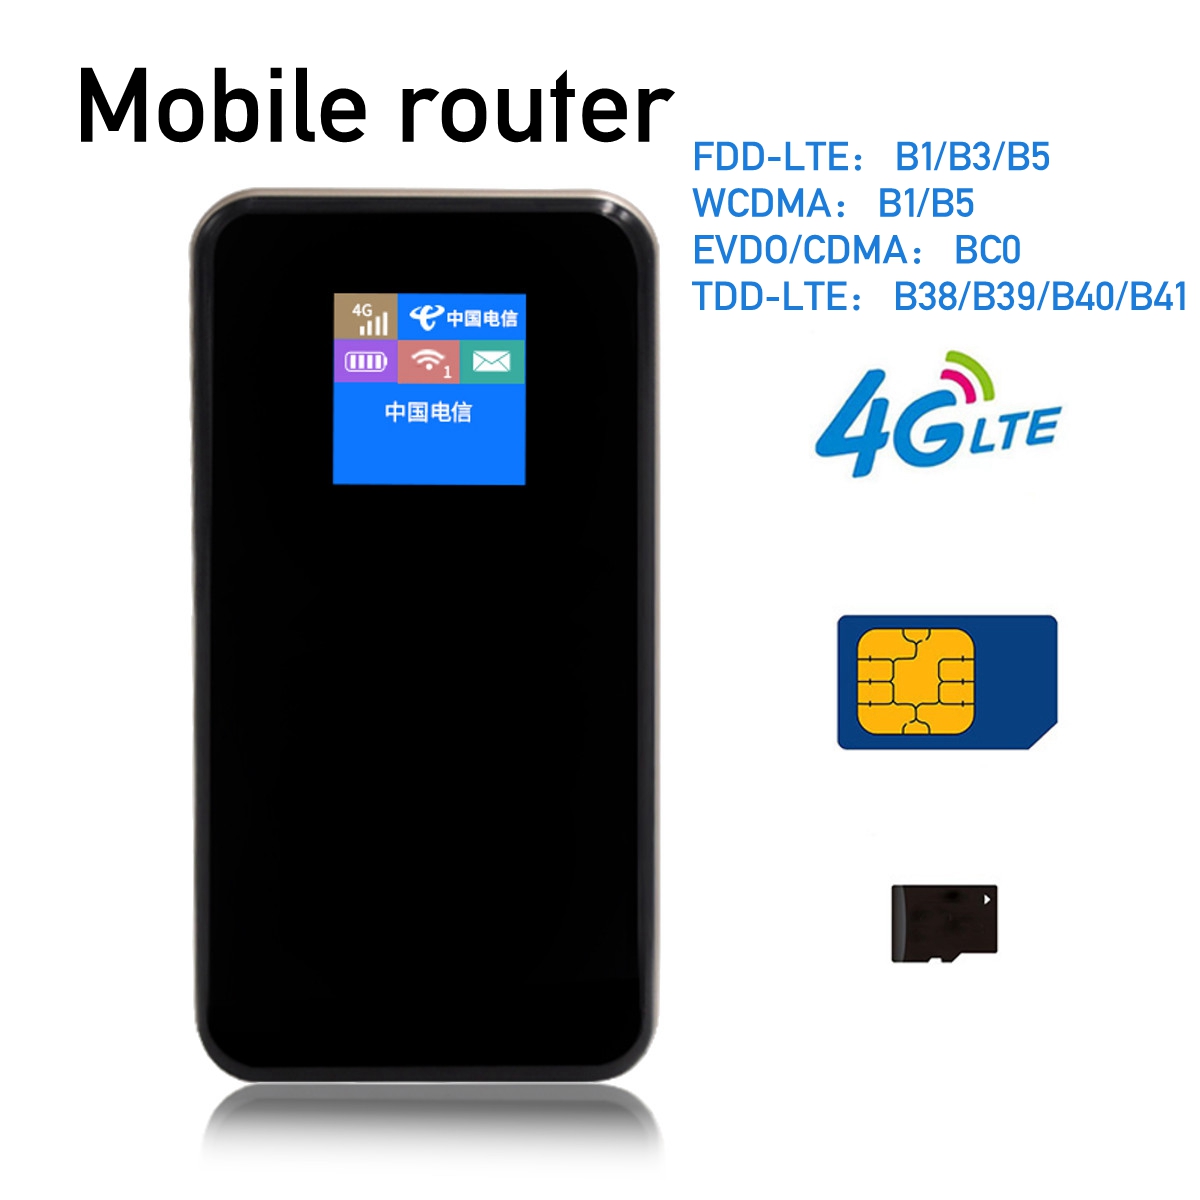 150Mbps-4G-Wifi-Portable-Wireless-Router-Support-SIM-And-TF-Card-1459002